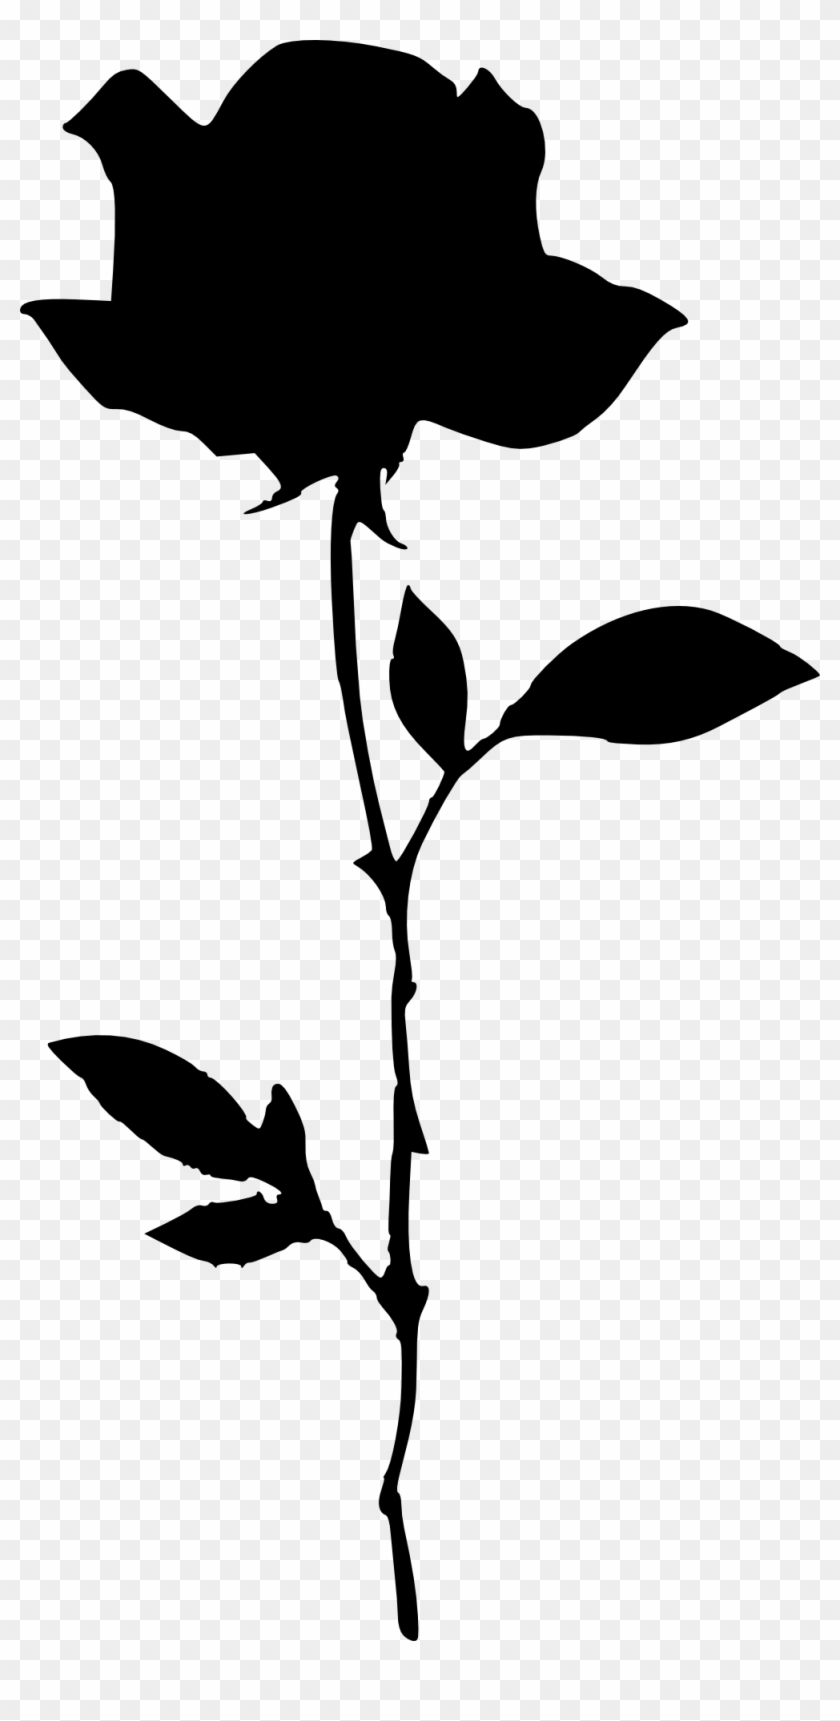 Silhouette Of A Flower - Rose Silhouette #242556